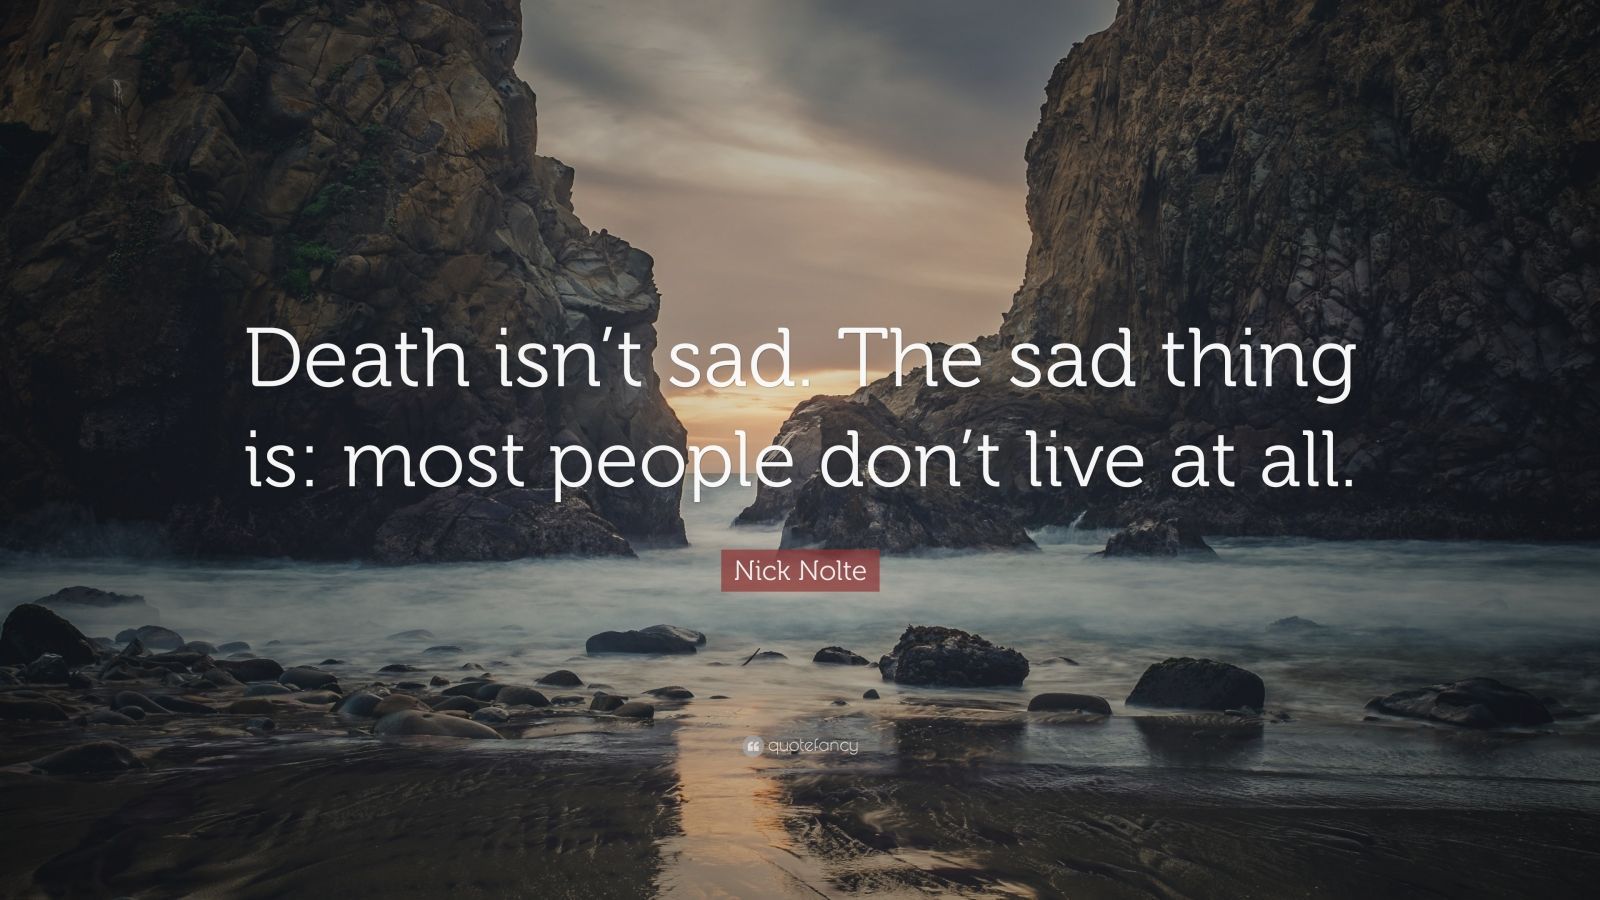 Nick Nolte Quote: “Death isn't sad. The sad thing is: most people don't live at all.”